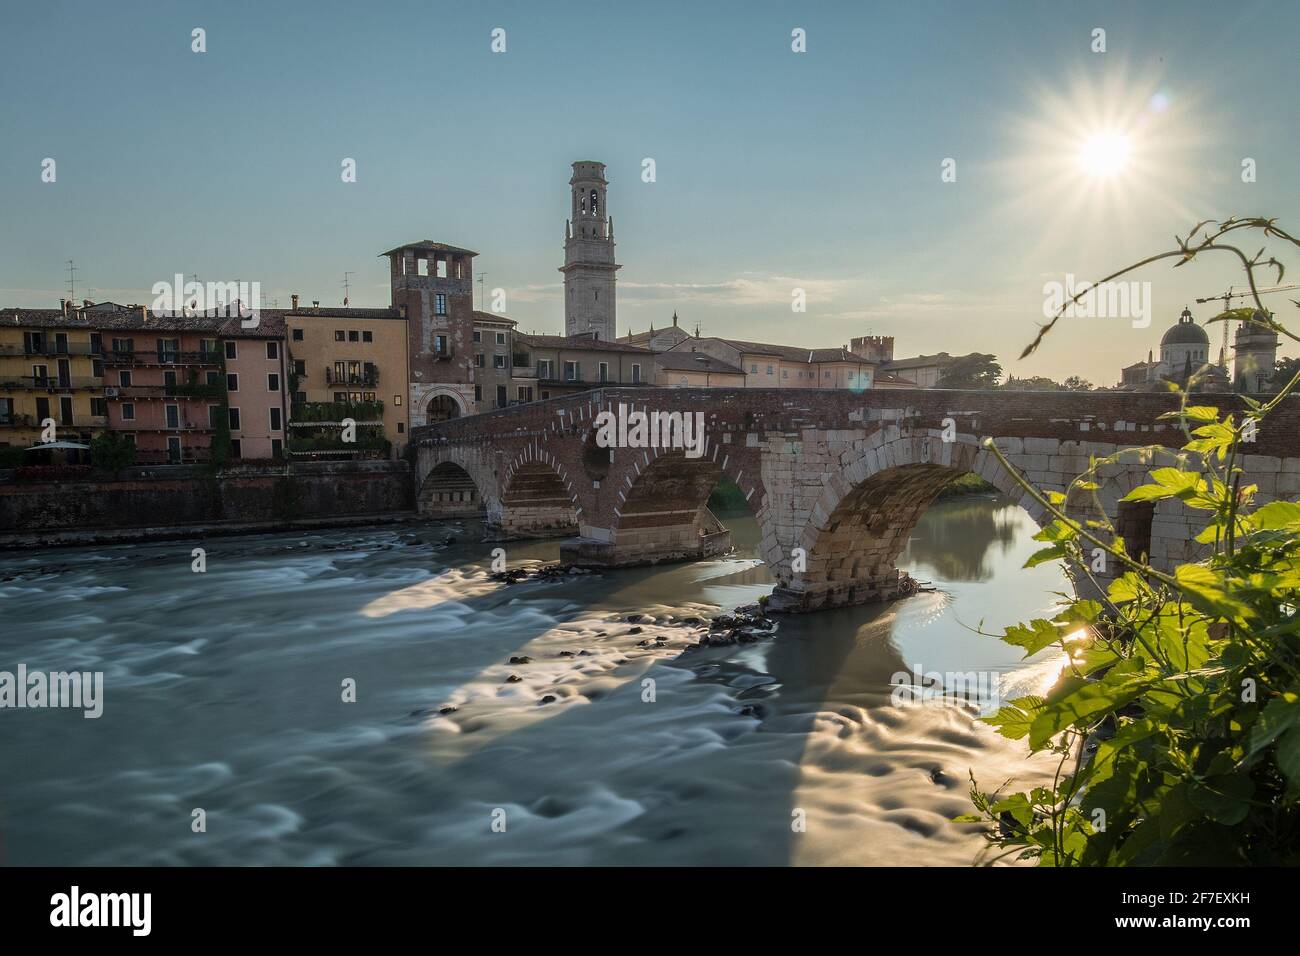 view of the famous Ponte Pietra in Verona, rising above the river of Adige in Italy on early afternoon. Long exposure daylight shot on a sunny evening Stock Photo